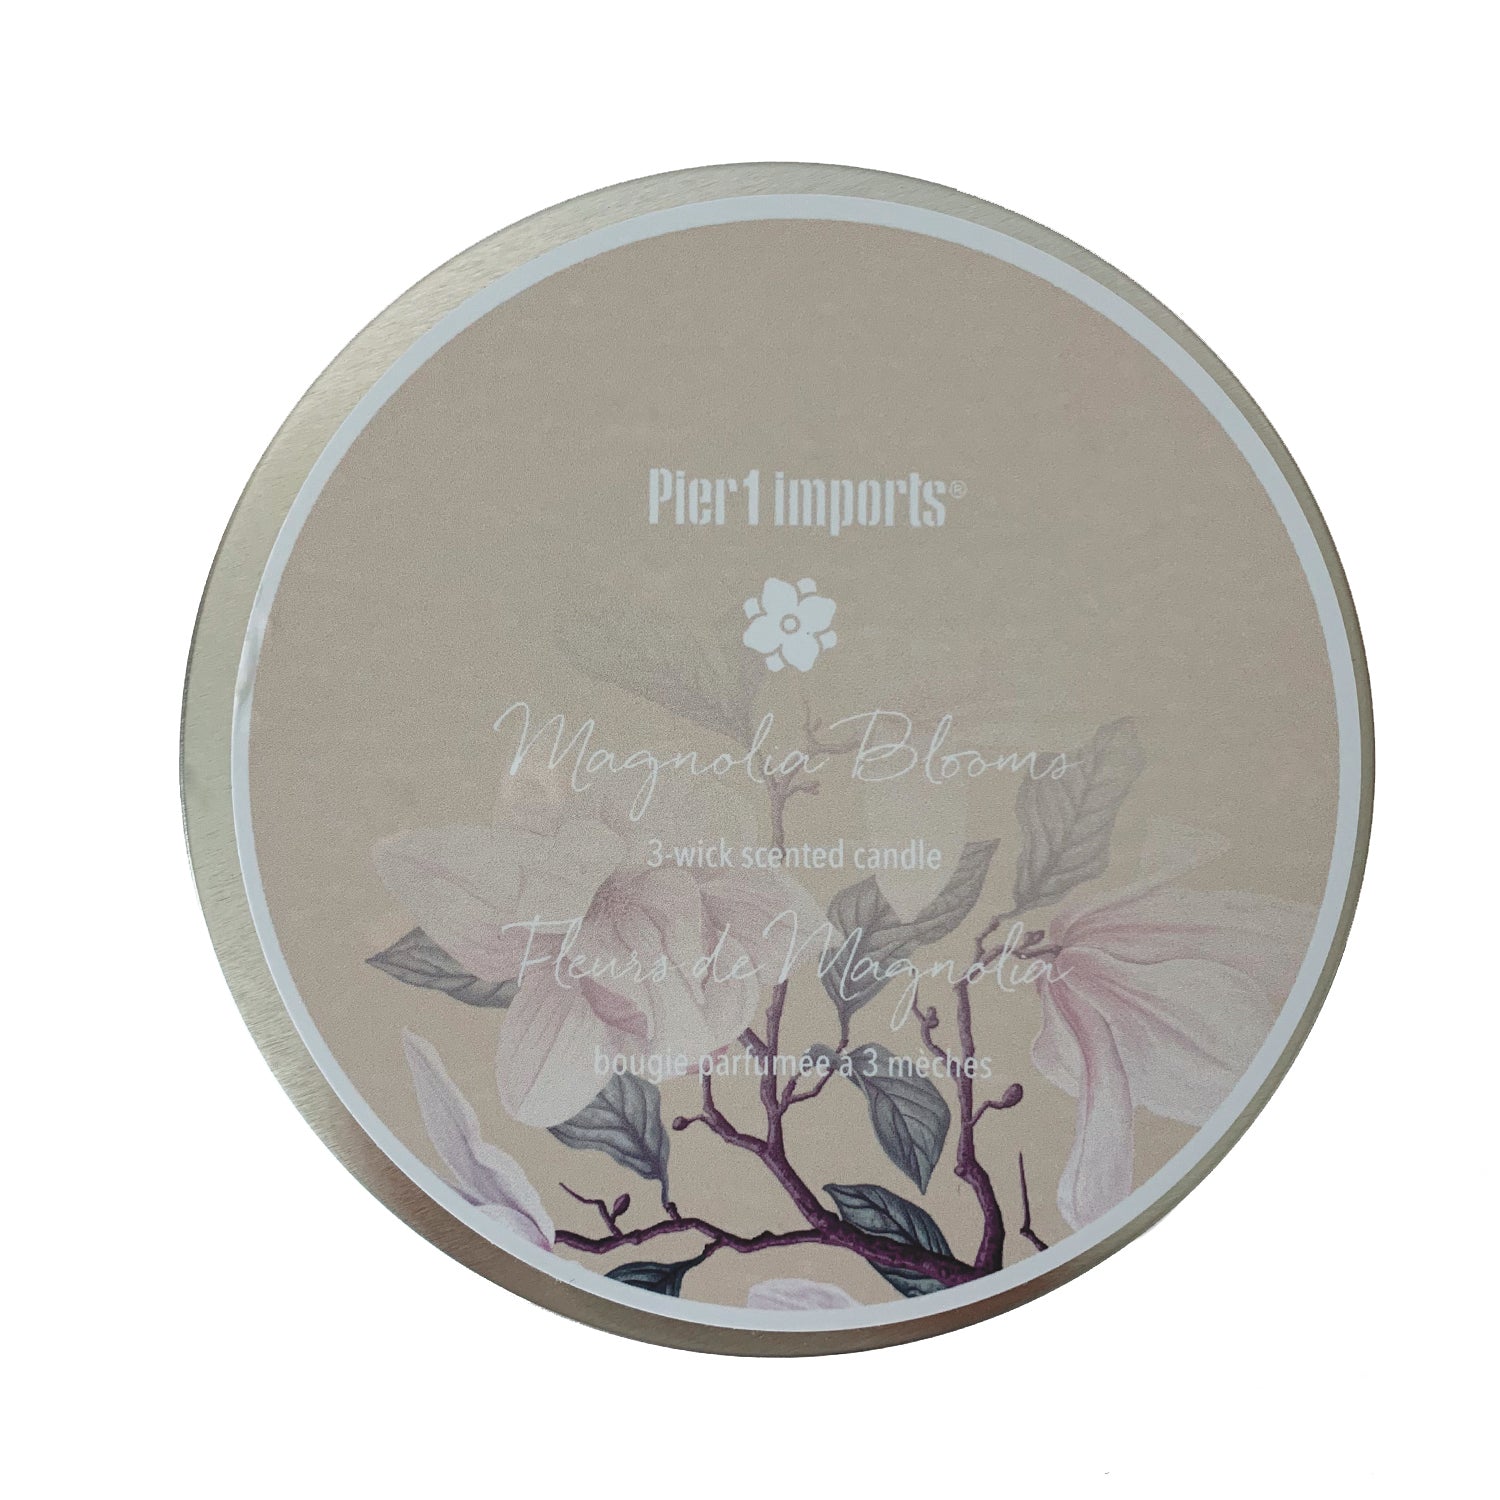 Pier 1 Magnolia Blooms 14oz Filled 3-Wick Candle - The Home Resolution